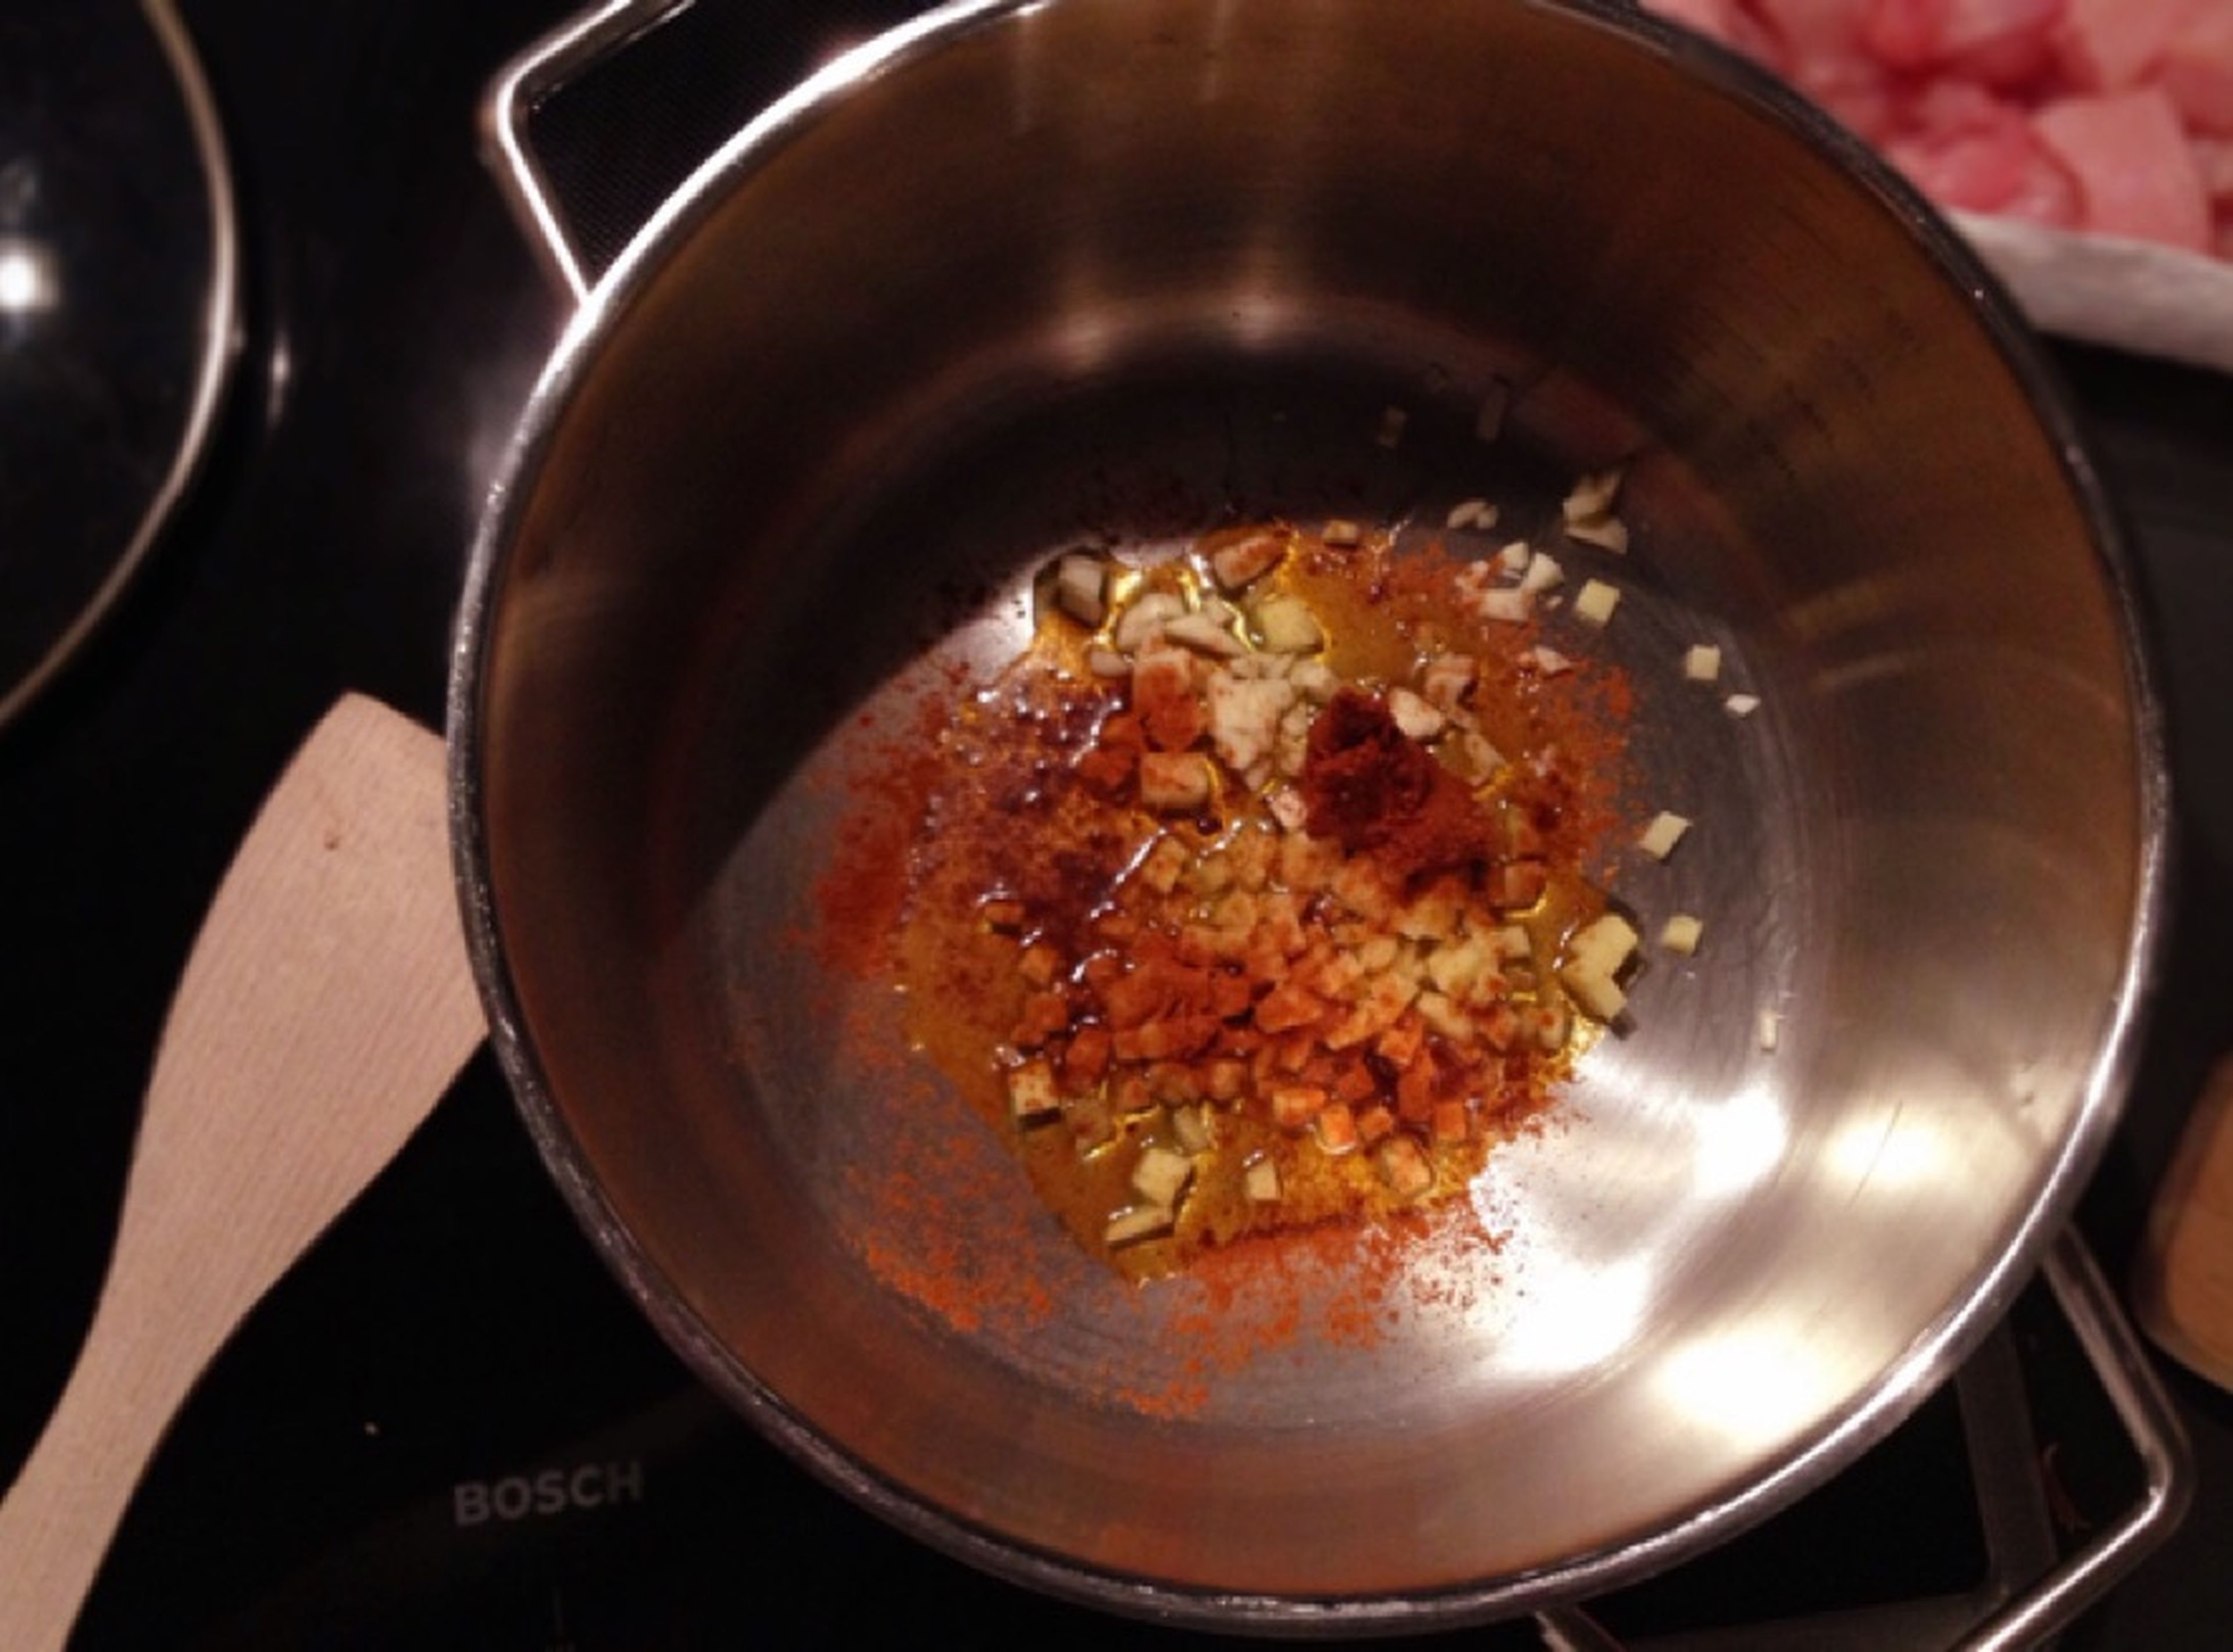 Heat olive oil in a large pot. Add garlic, ginger, curry powder, chili powder, and curry paste and fry until fragrant.